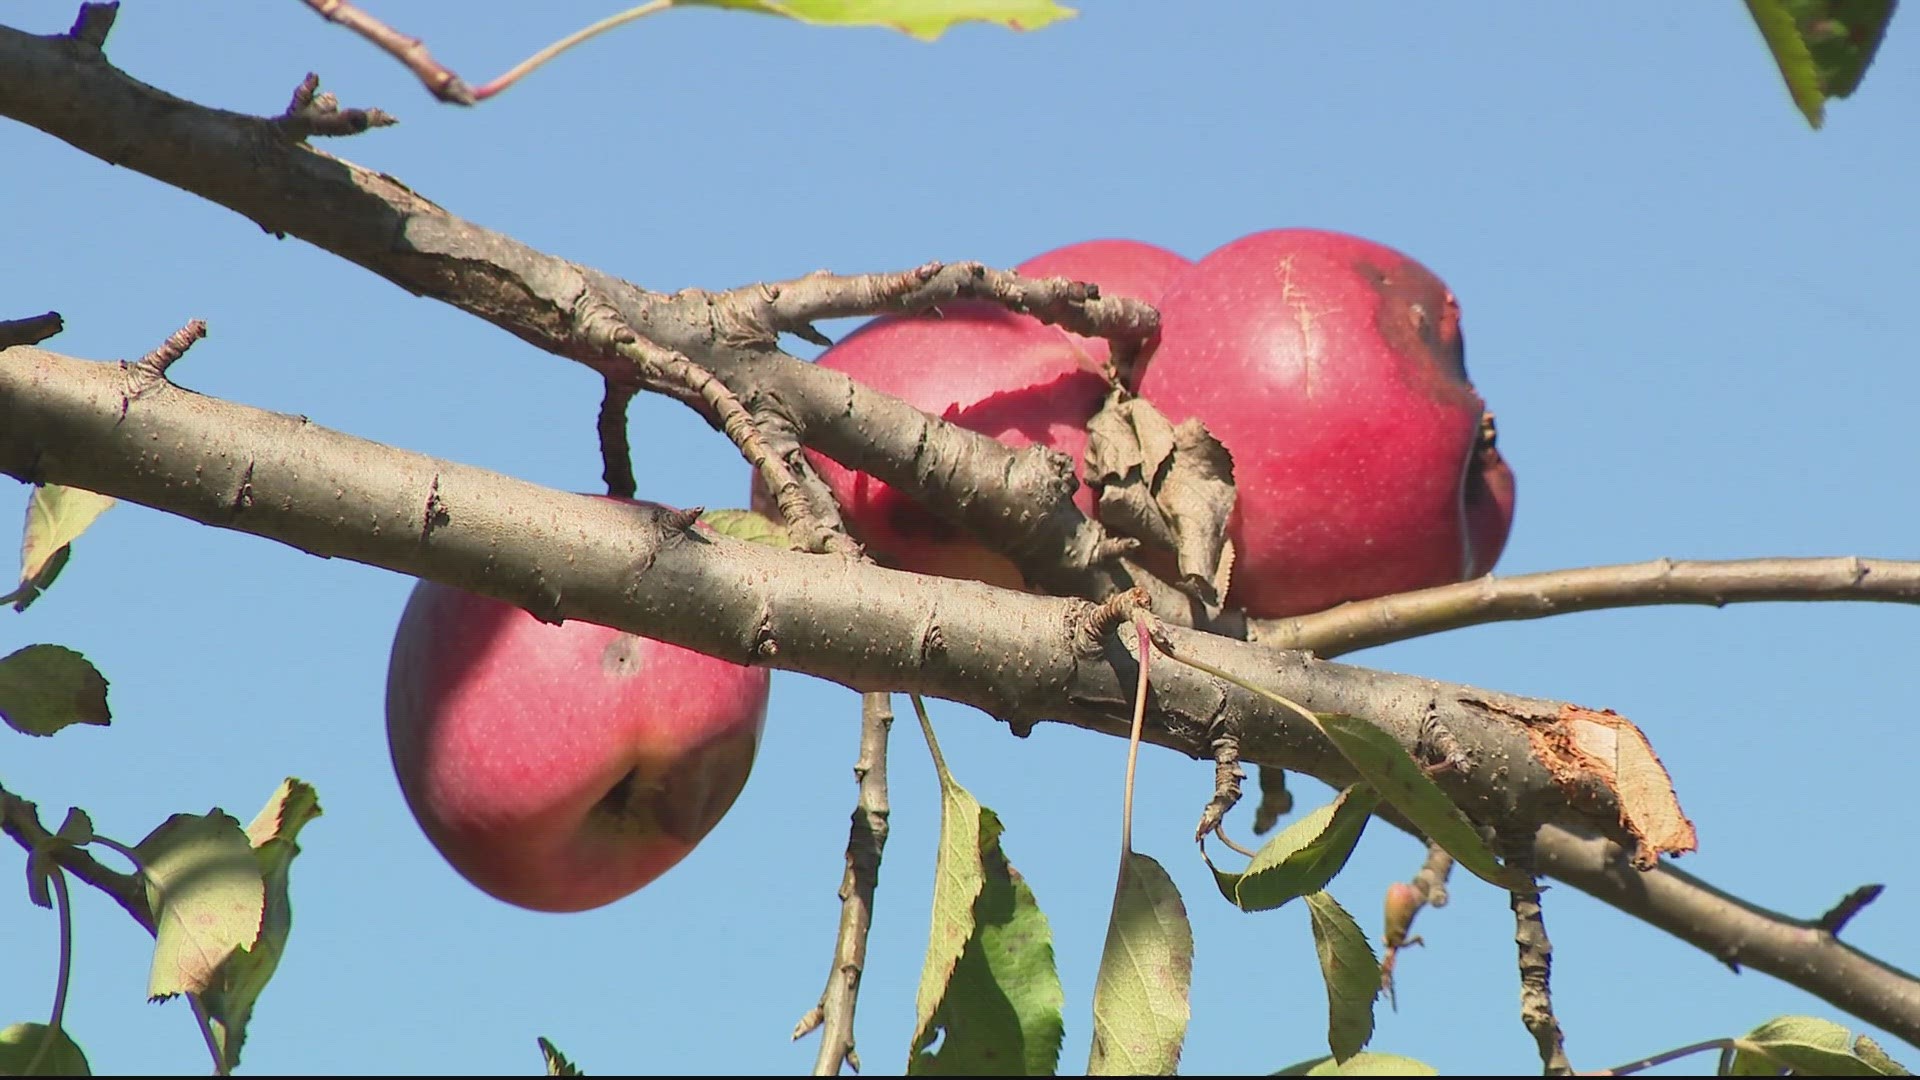 UMD researchers have been working for decades to create two new types of apples that are climate change resistant.